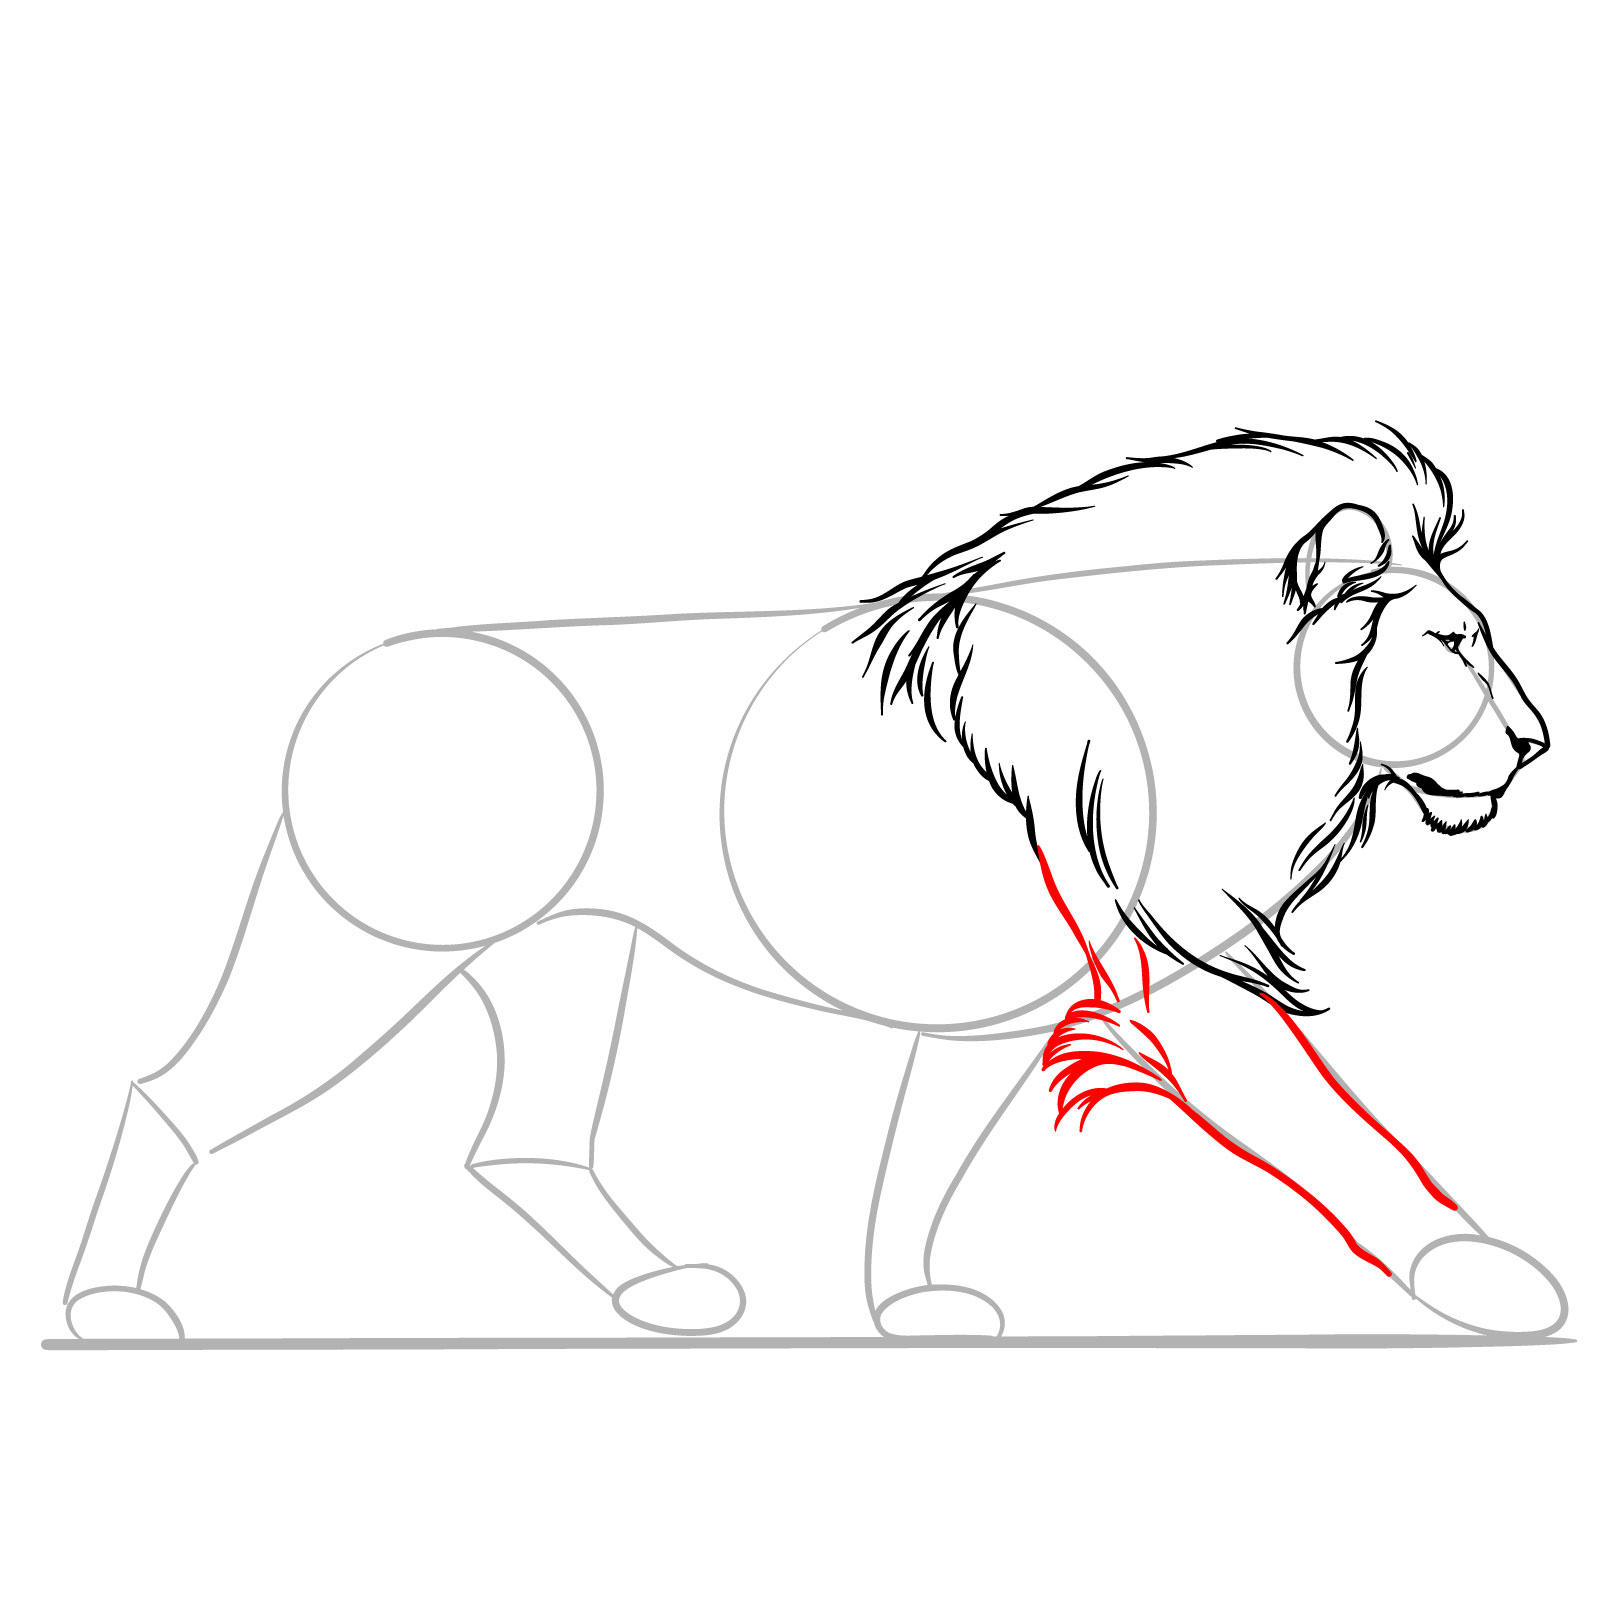 Guide for drawing the first front leg of a walking lion in side view - step 07